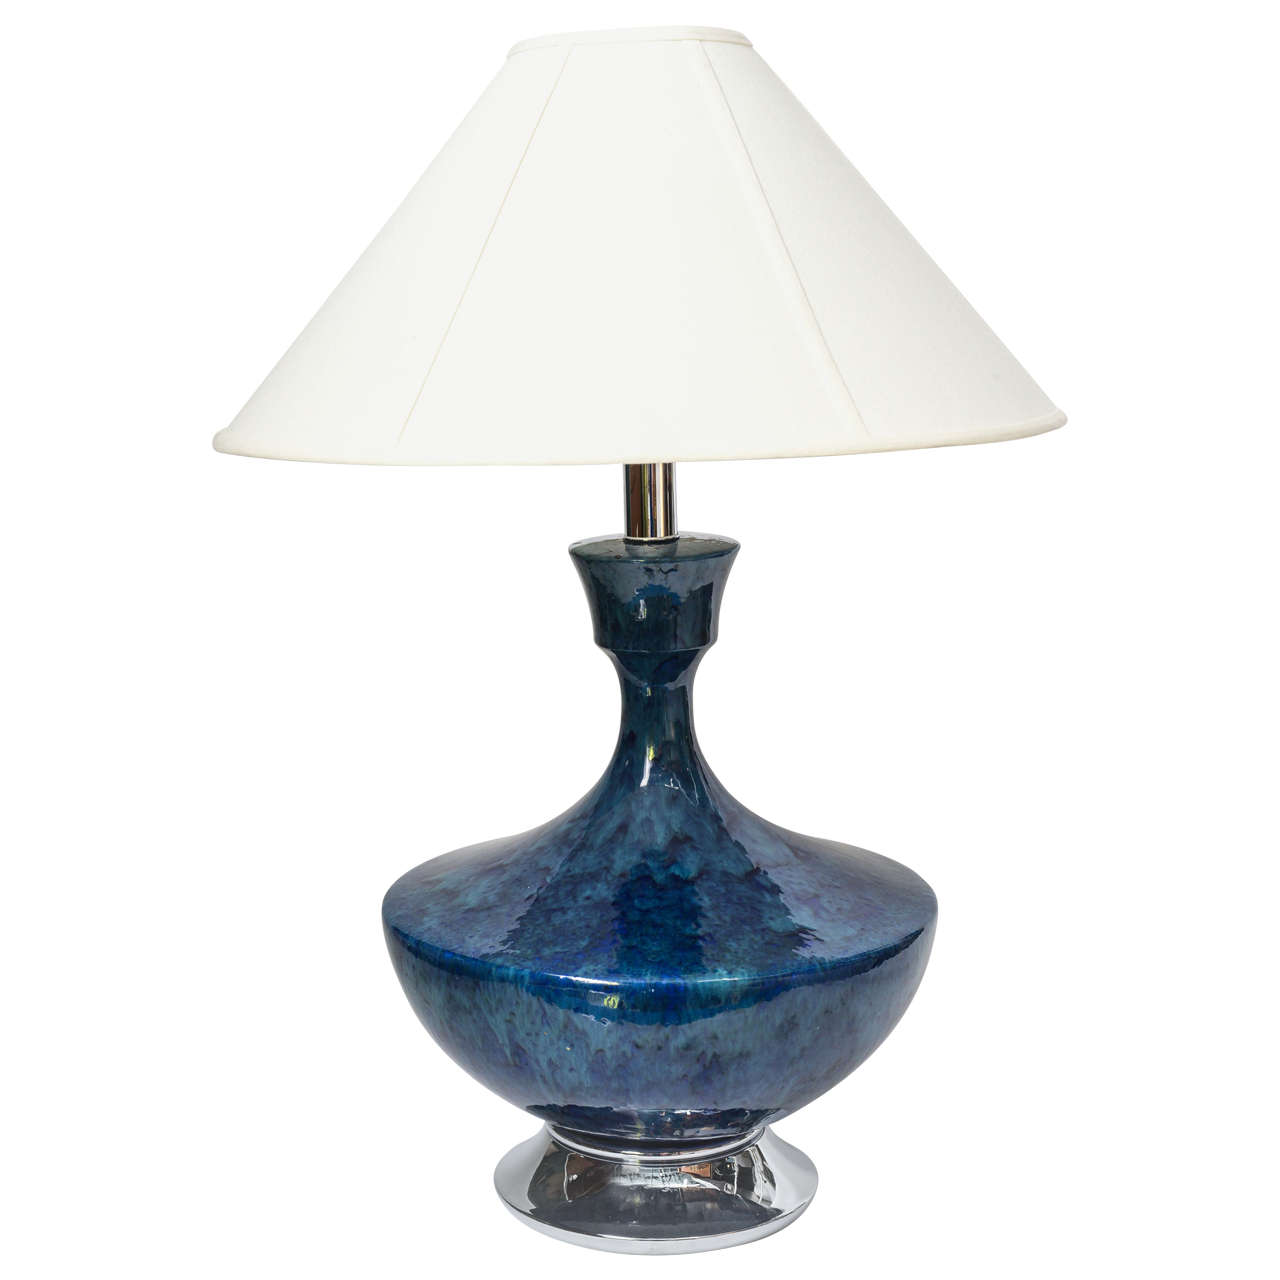 Midcentury Blue Urn Table Lamp For Sale